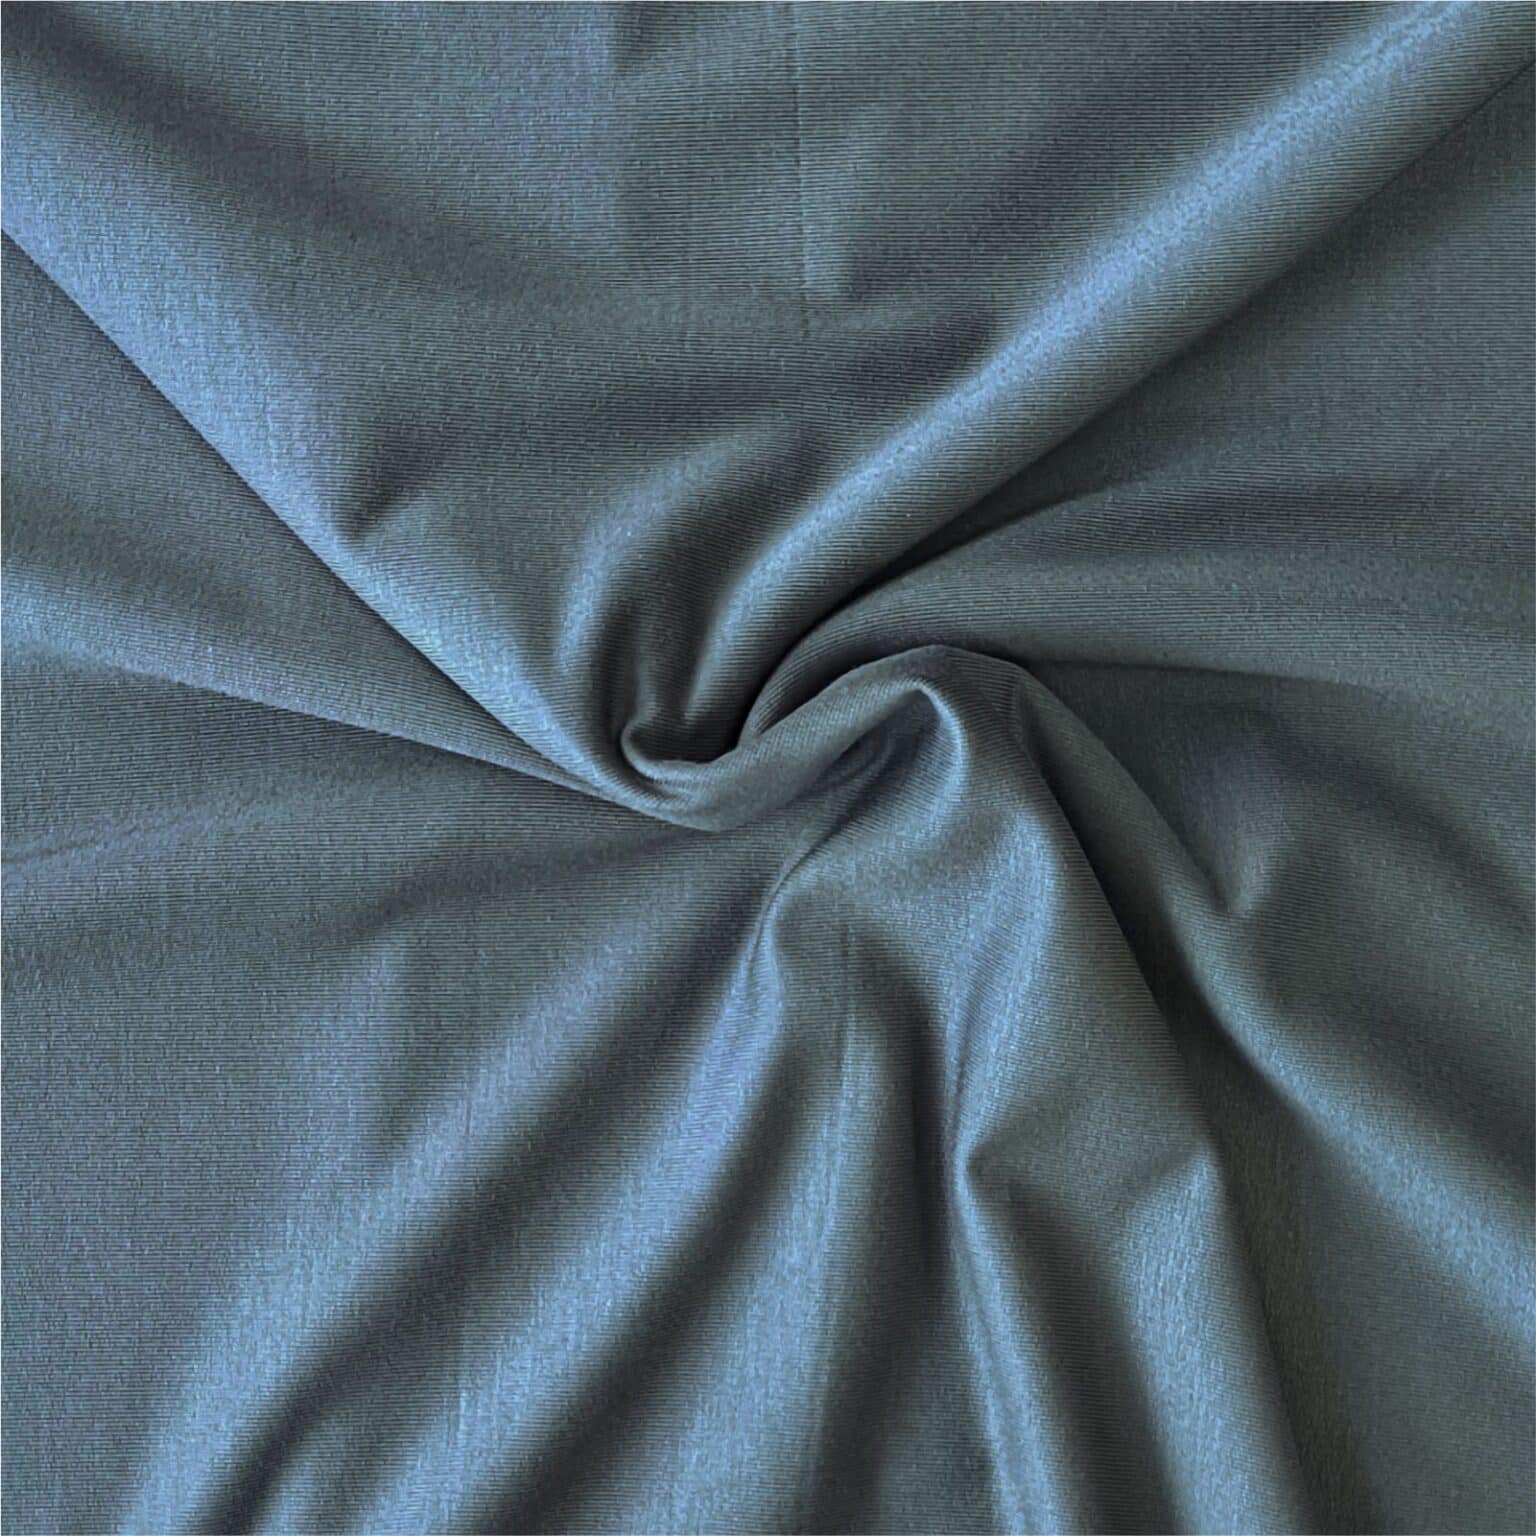 Blue Soft Touch Lyocell fabric | More Sewing